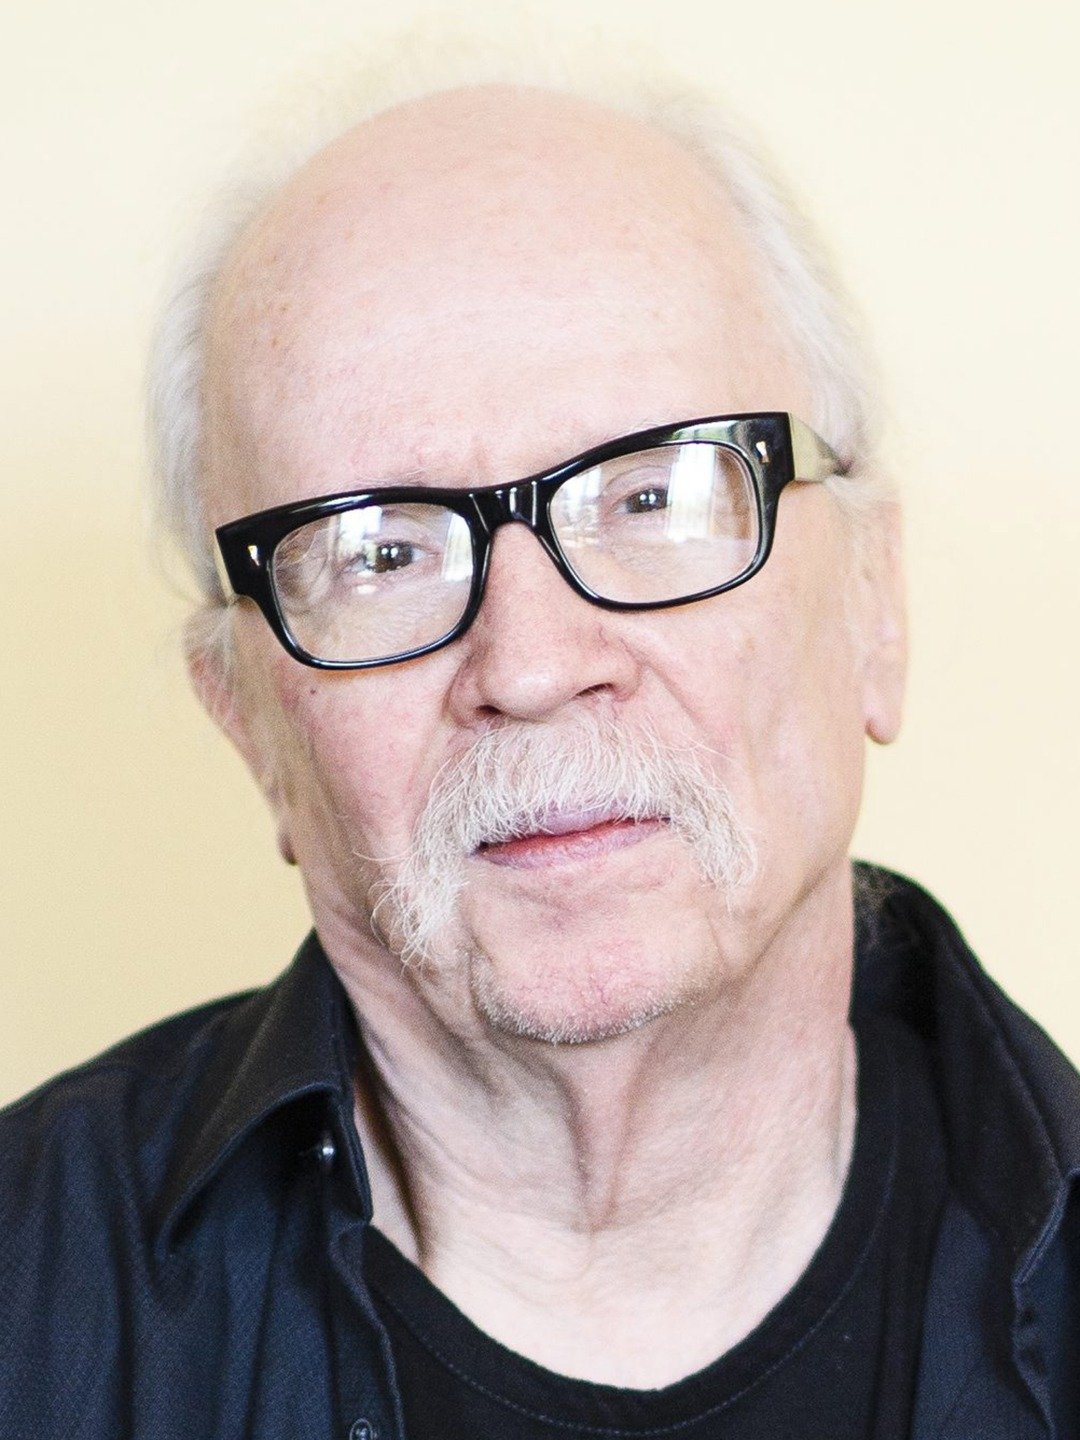 Horror icon John Carpenter on being a college dropout, 'Barbie